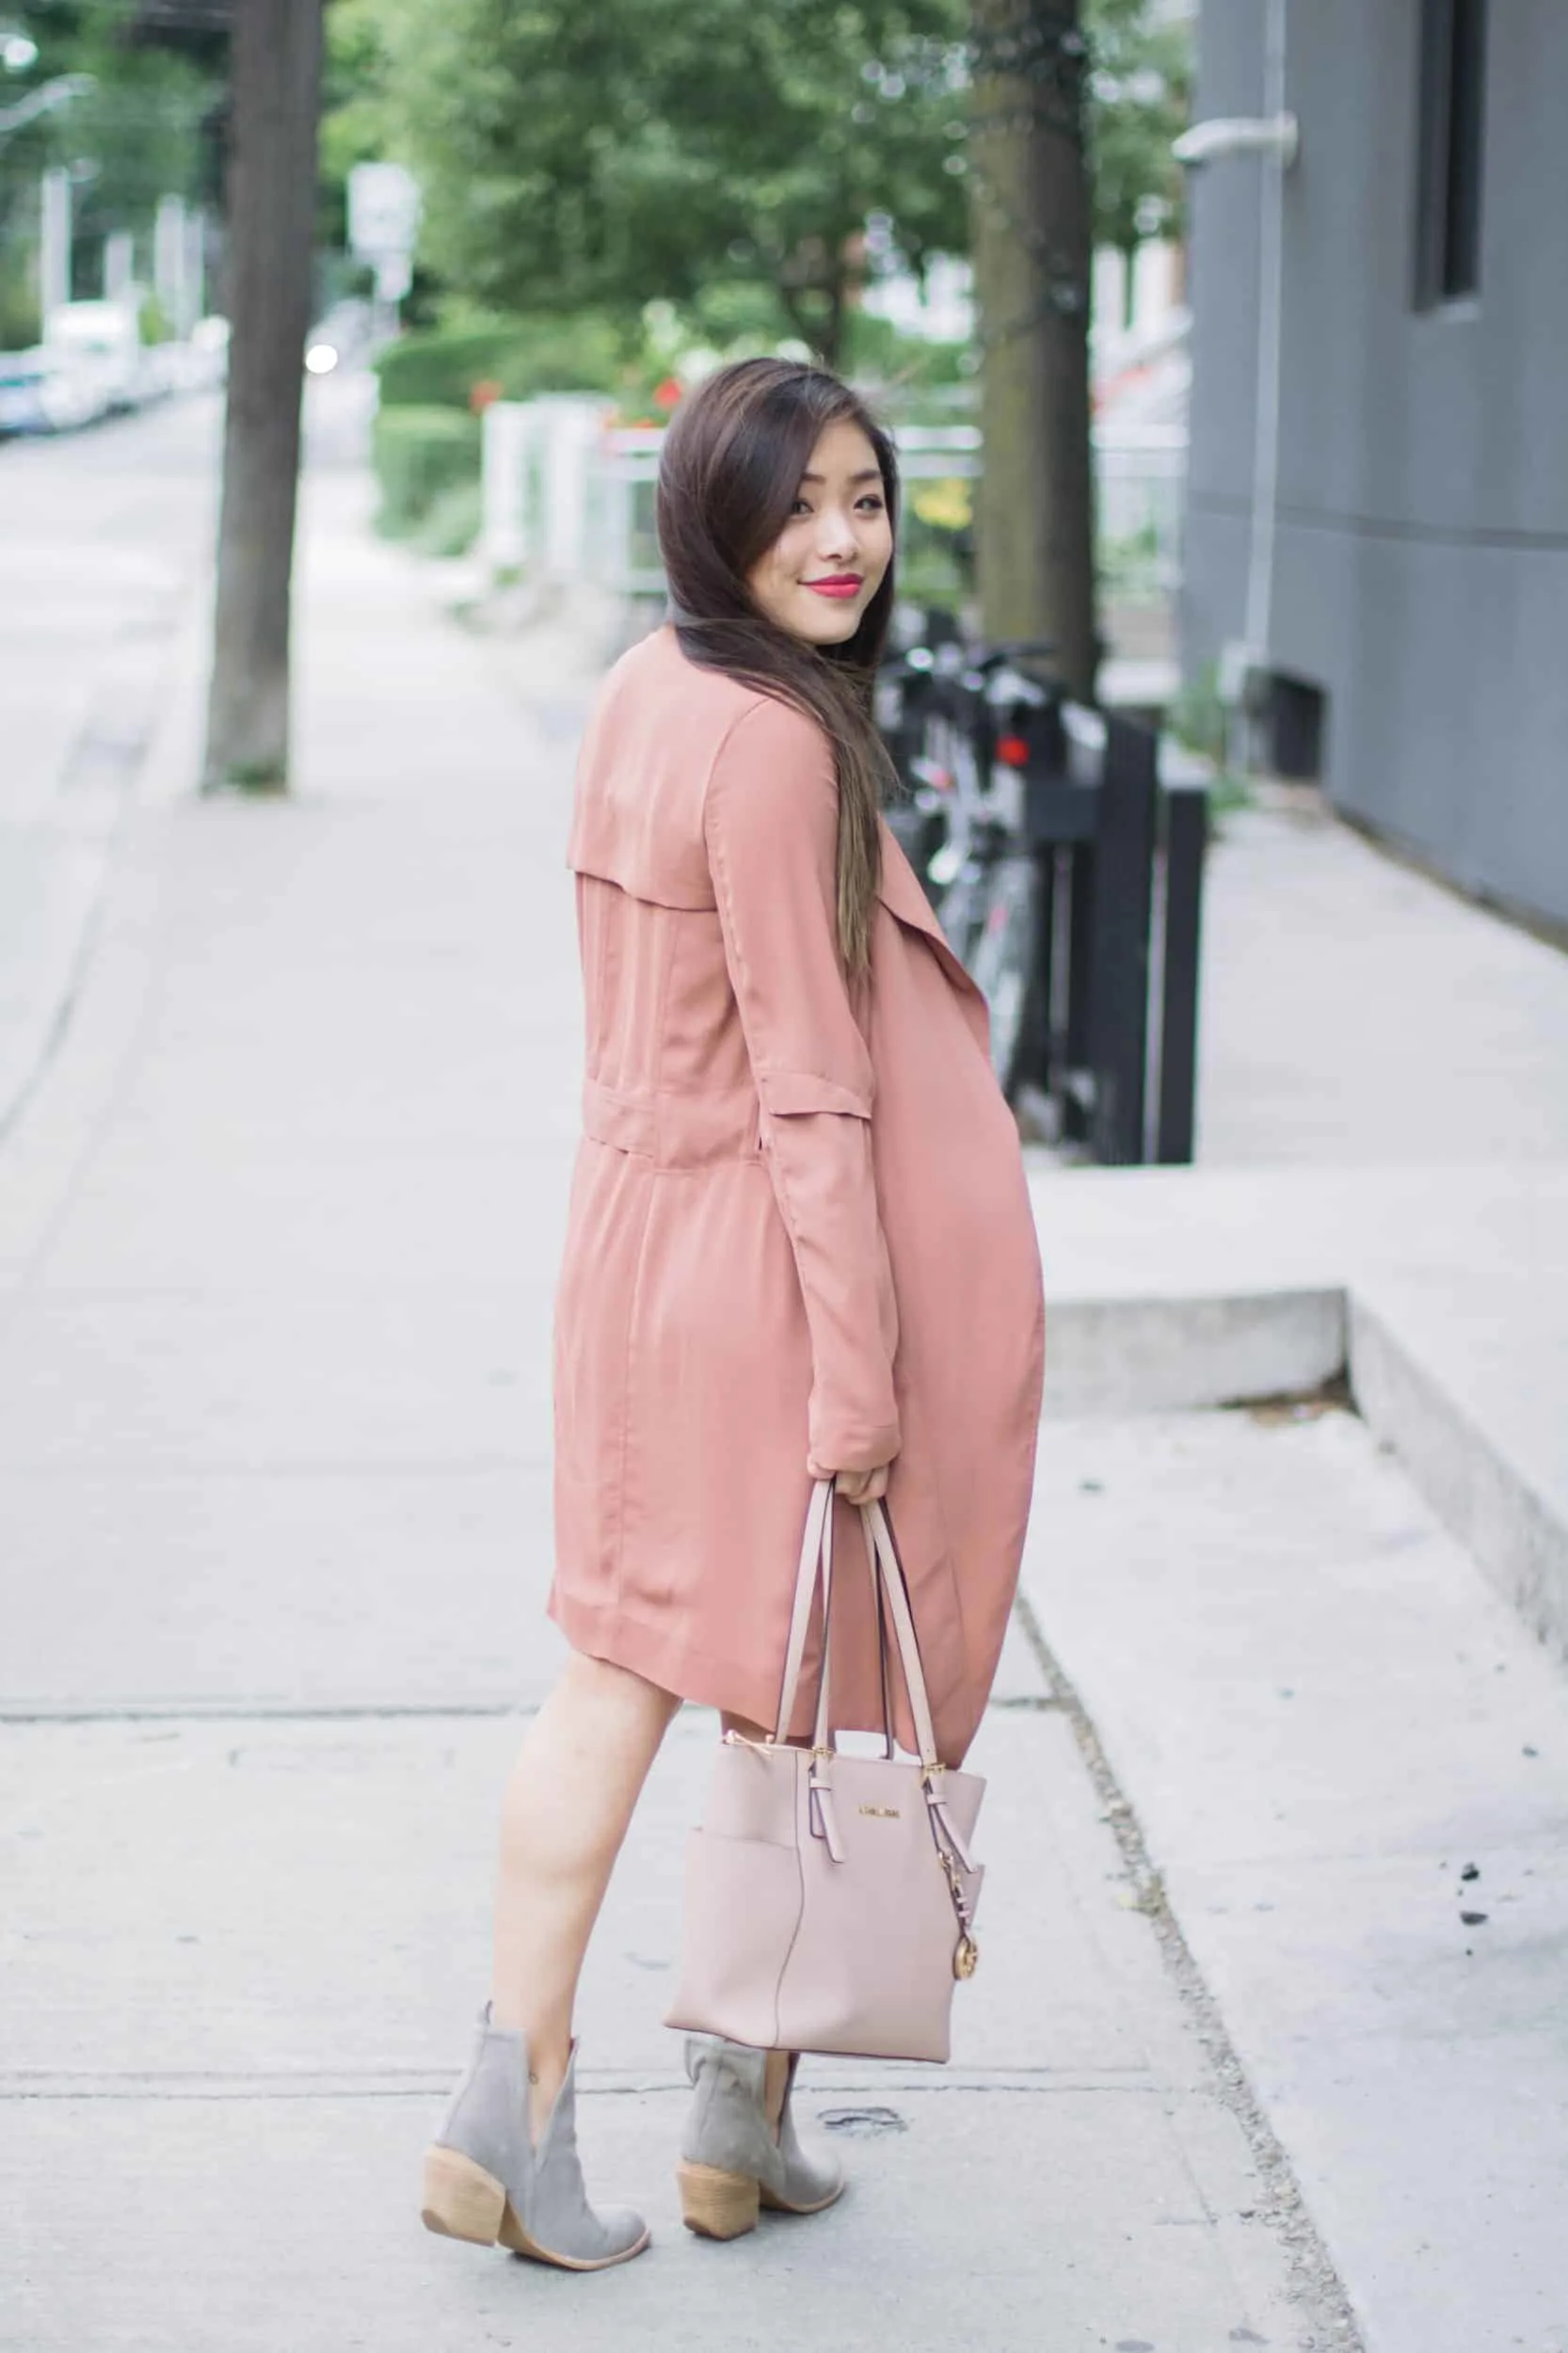 Summer outfit featuring Aritzia pink trench coat, Jeffrey Campbell grey suede booties, and nude Michael Kors bag